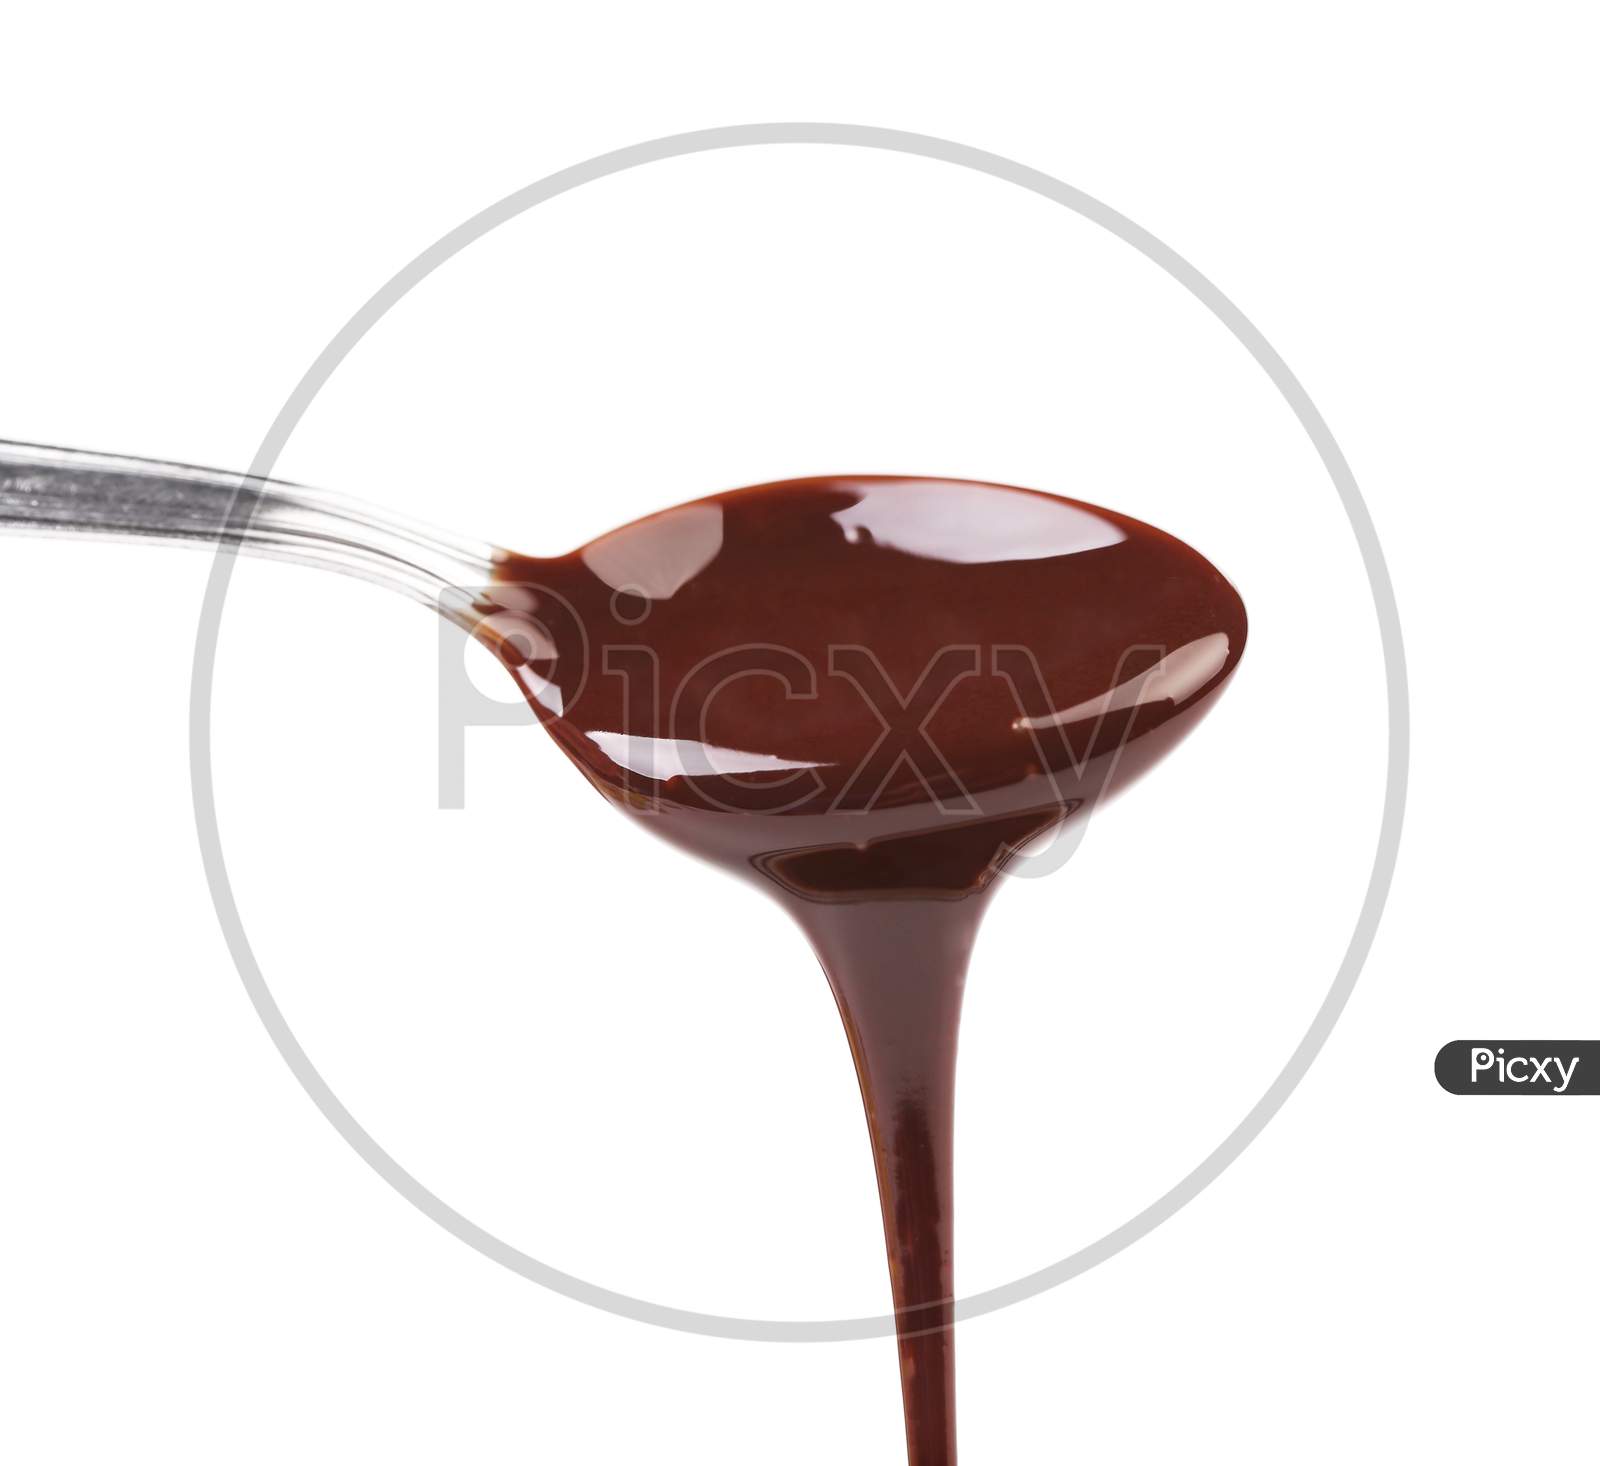 Liquid Chocolate On A Spoon. Isolated On A White Background.